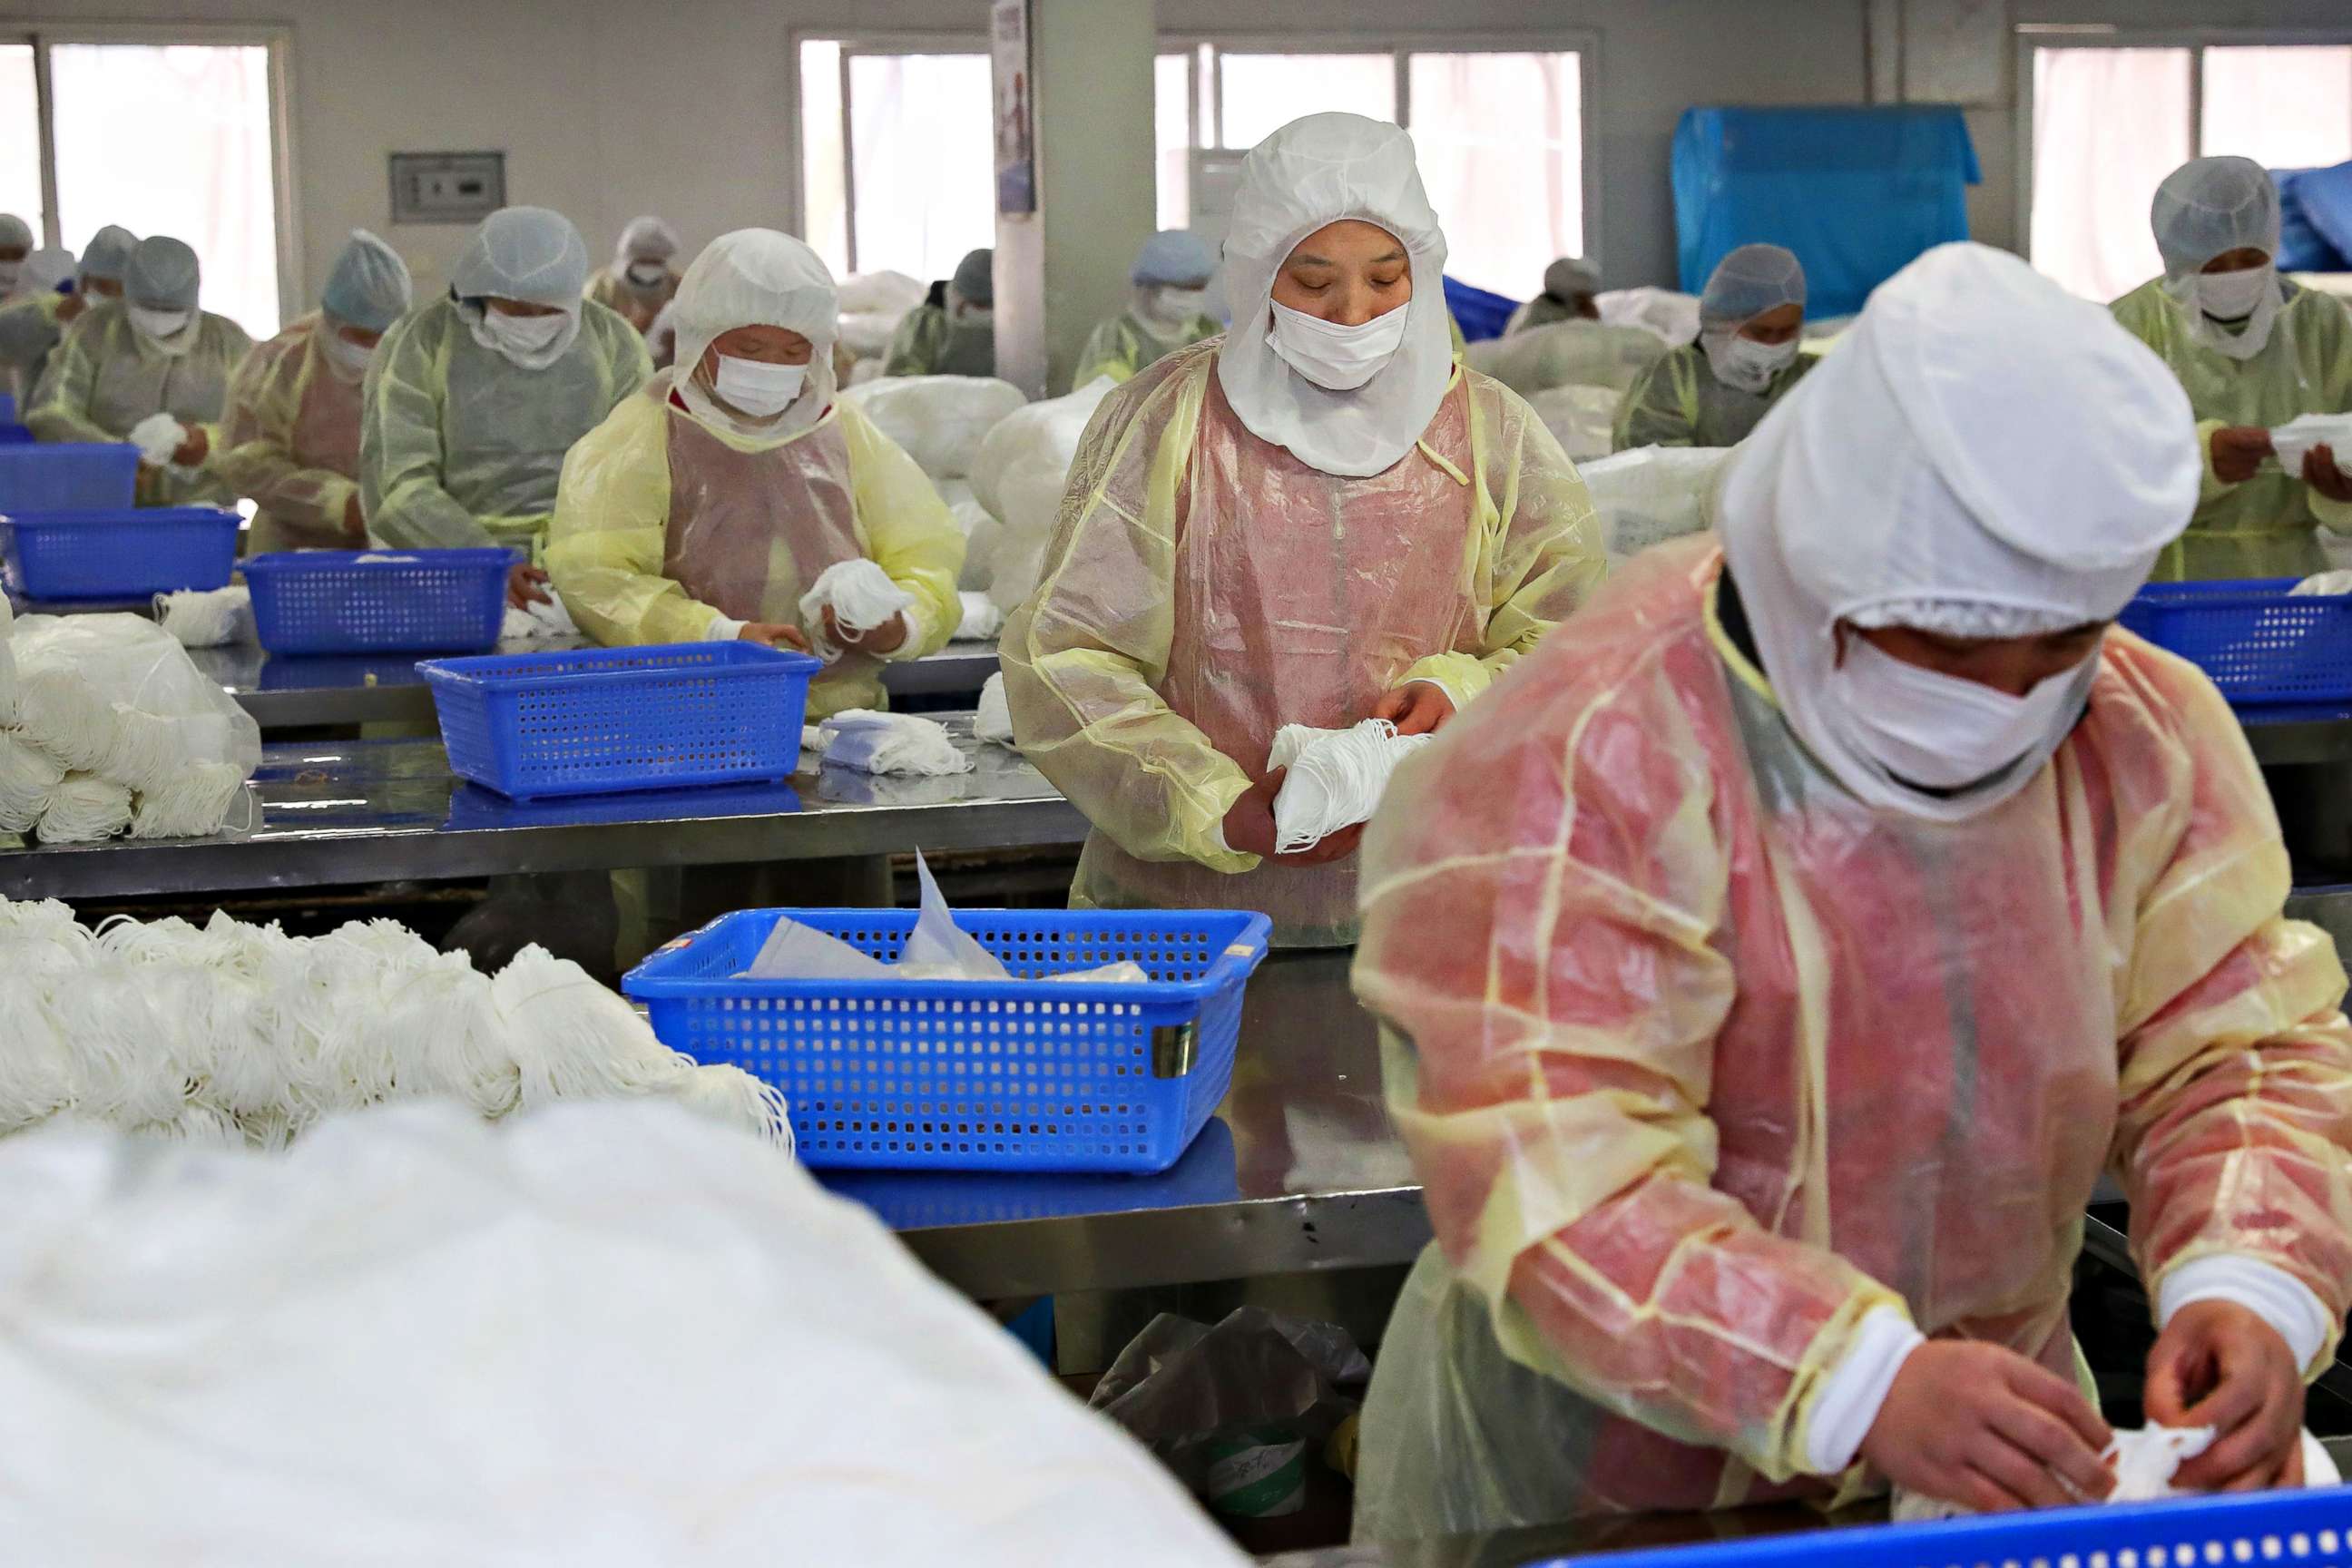 PHOTO: Workers produce face masks at a factory in Nantong in China's eastern Jiangsu province on Jan. 27, 2020, to support the supply of medical materials during a deadly virus outbreak which began in Wuhan.